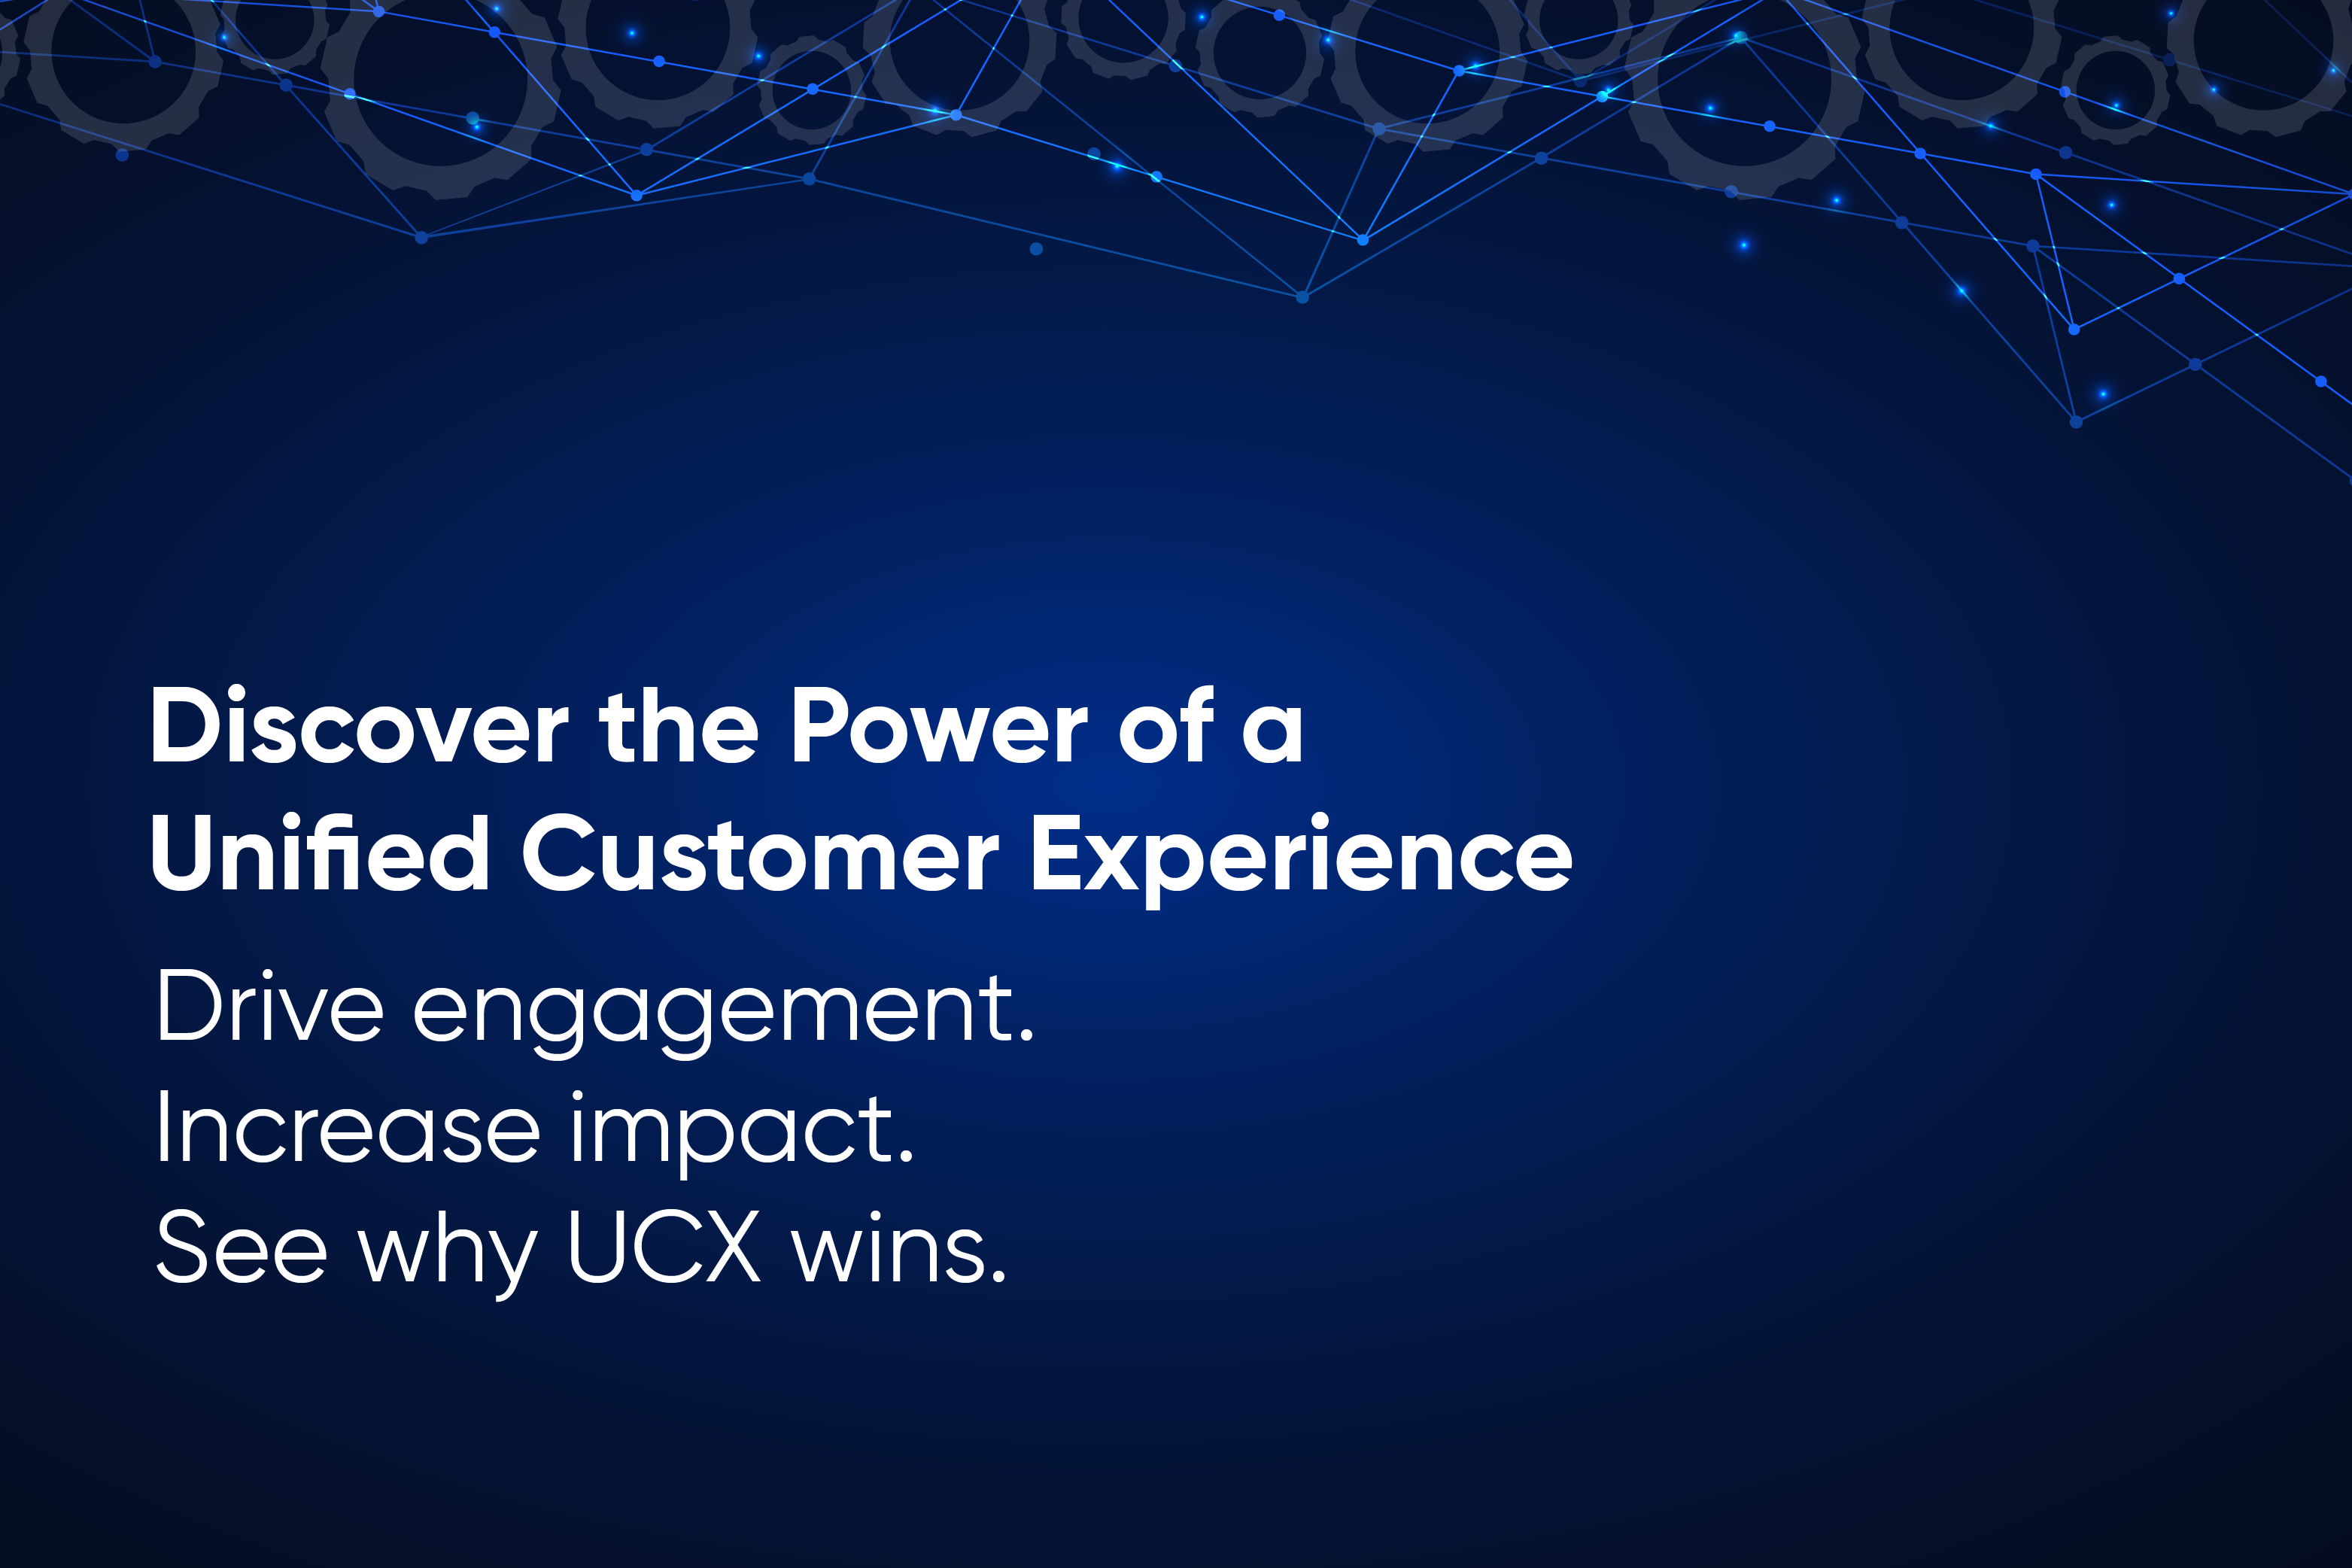 Unified Customer Experience (UCX)